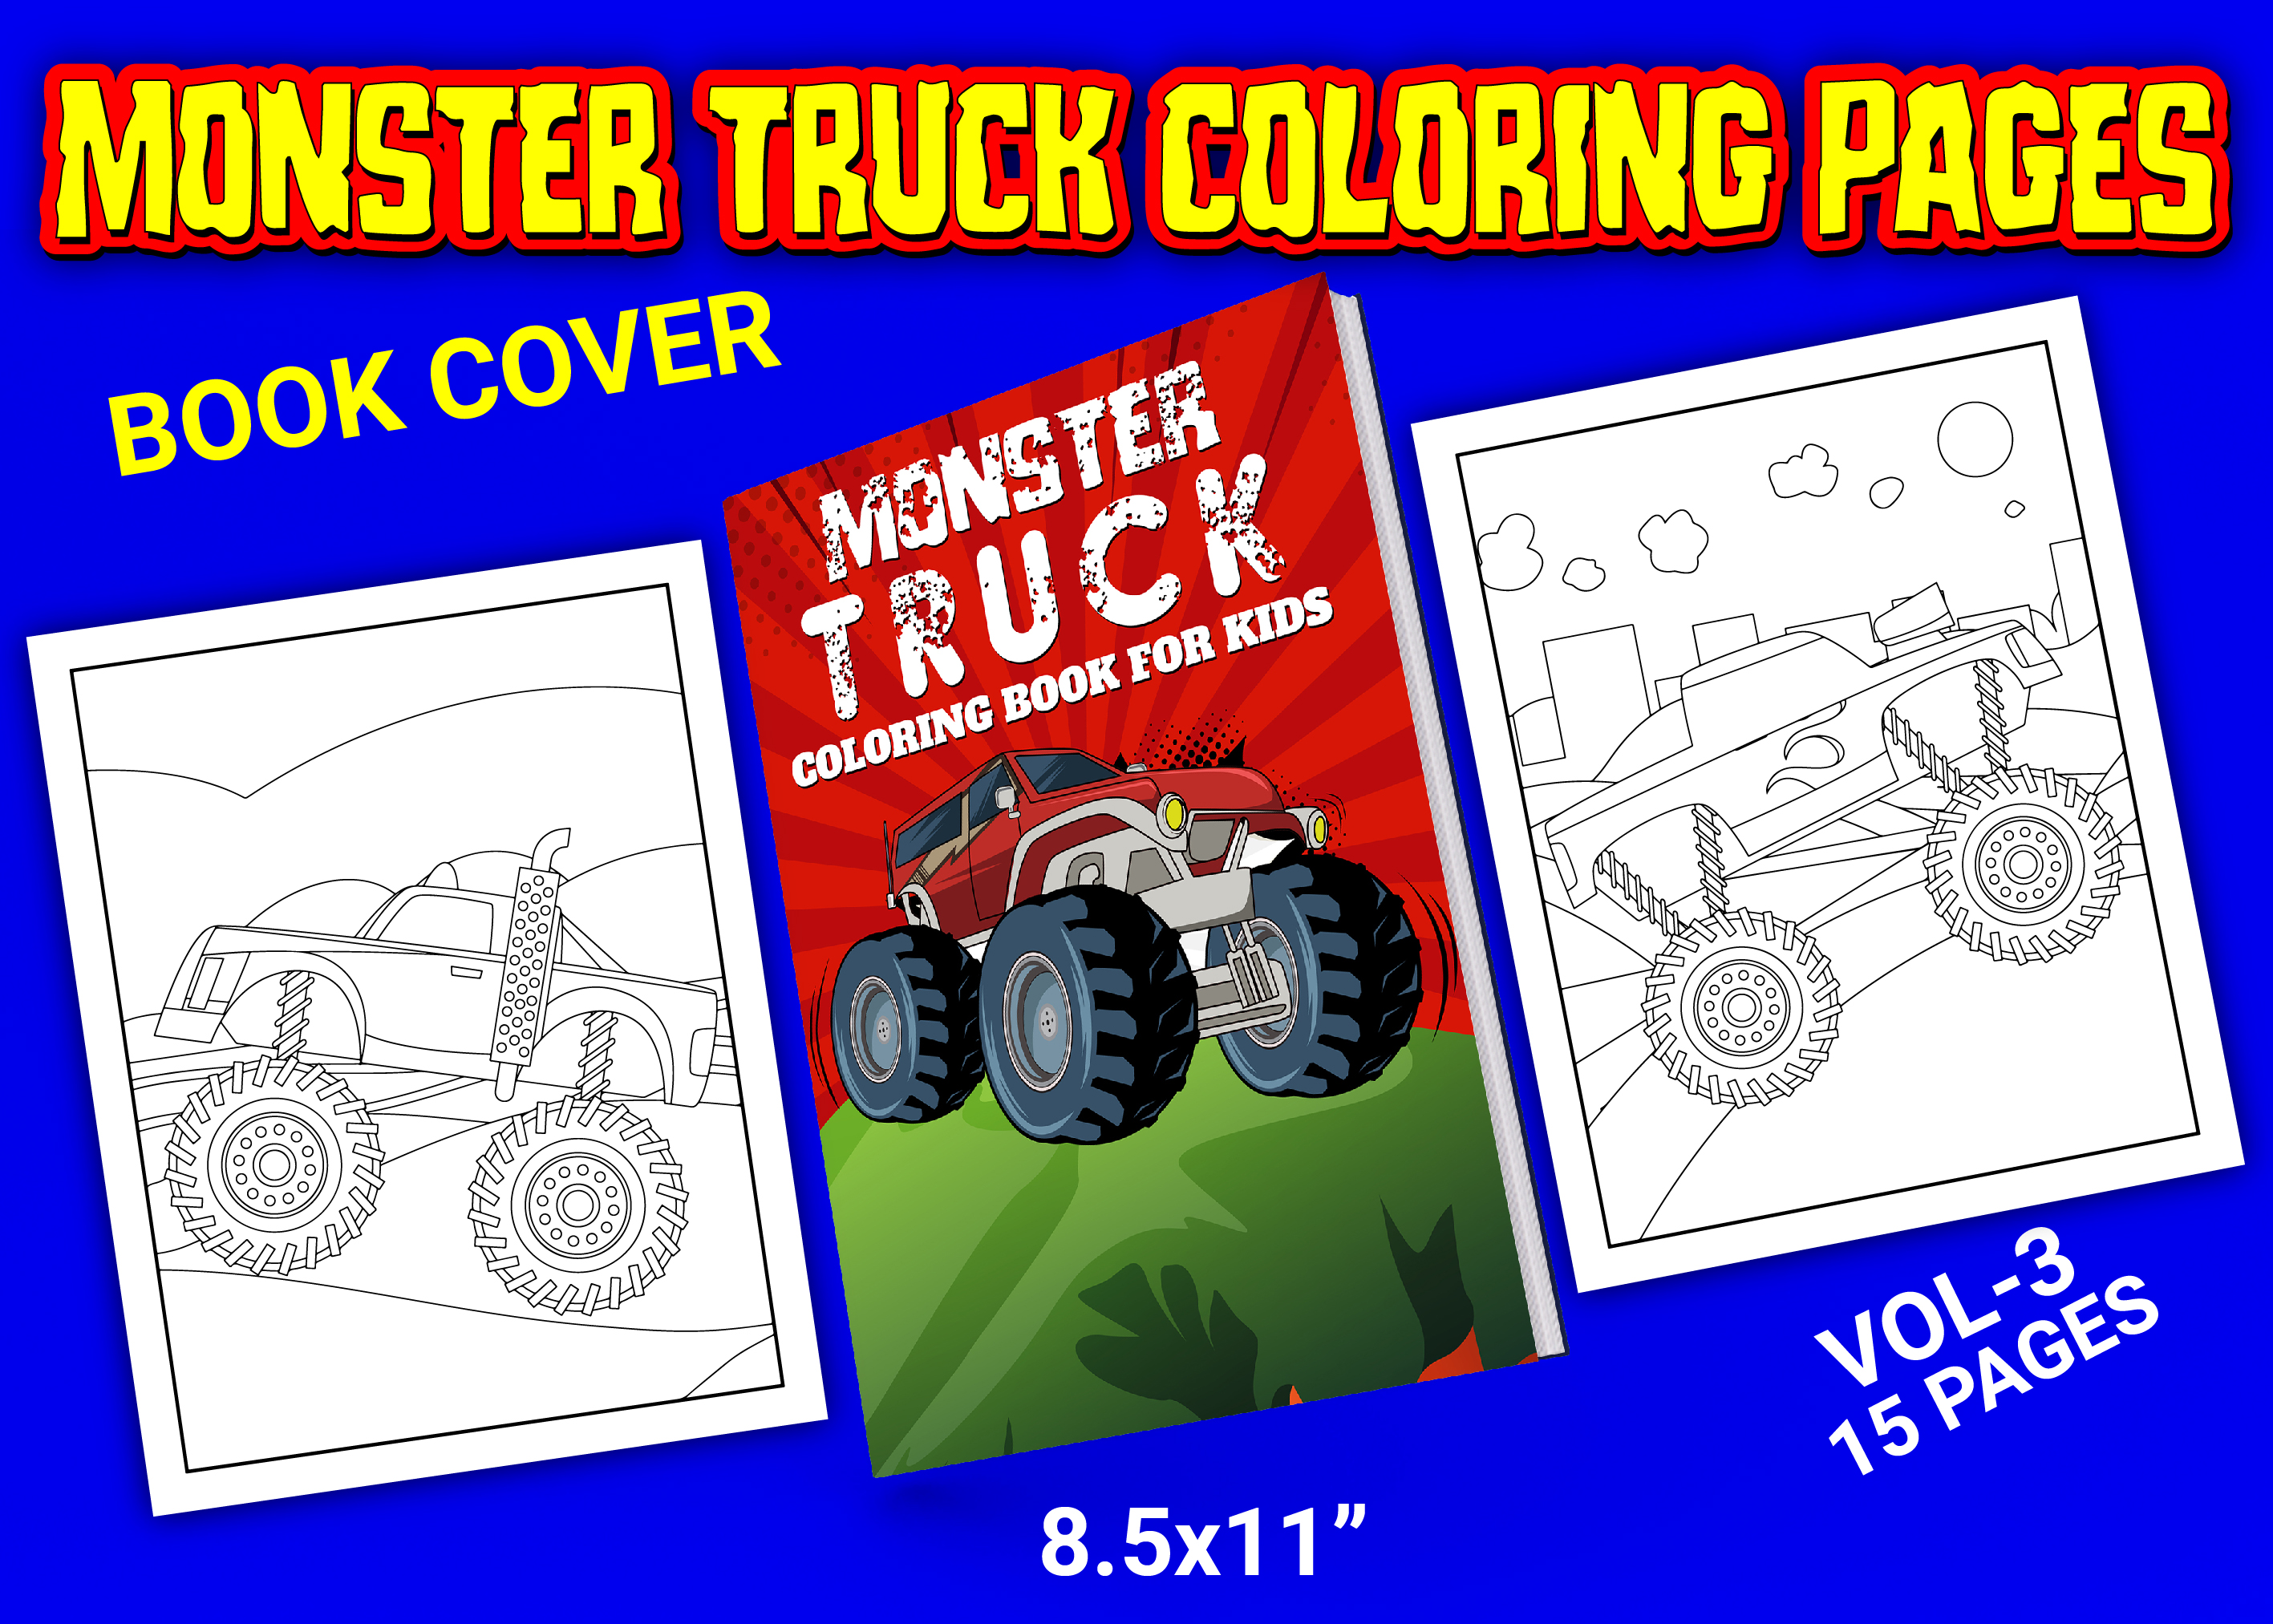 Premium Vector  Printable monster truck coloring pages for kids premium  vector